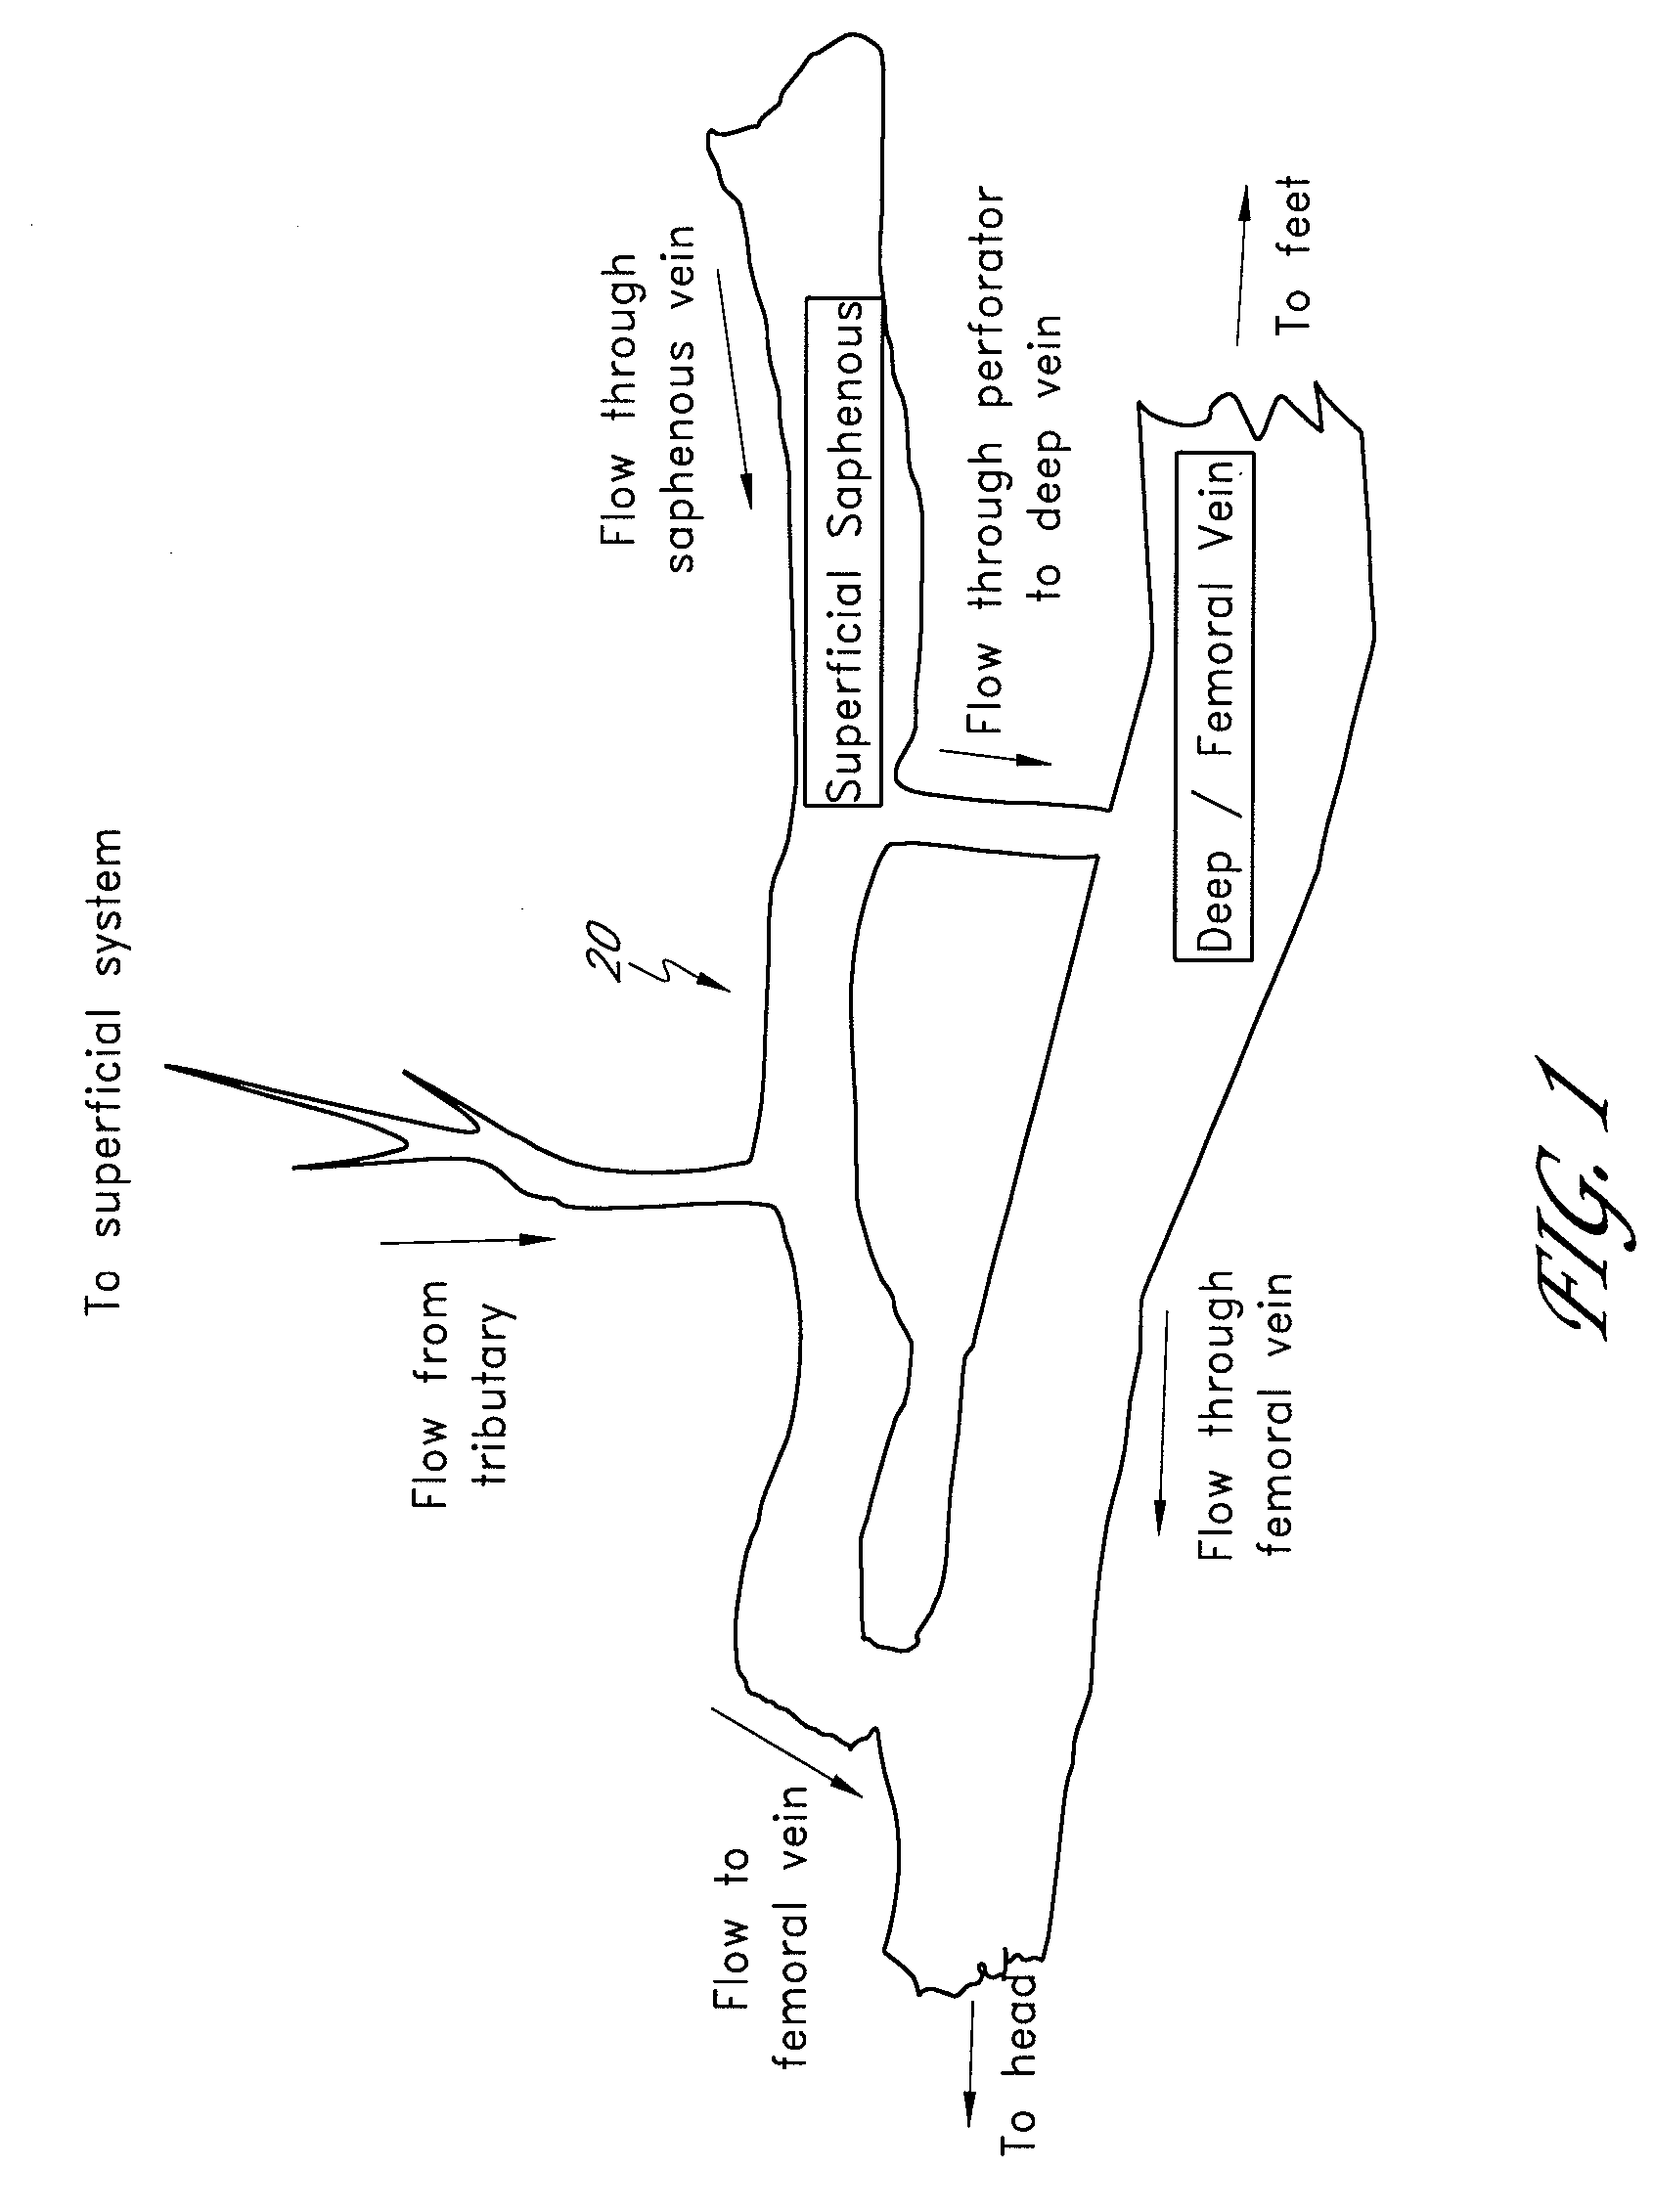 Method and apparatus for implanting an occlusive structure